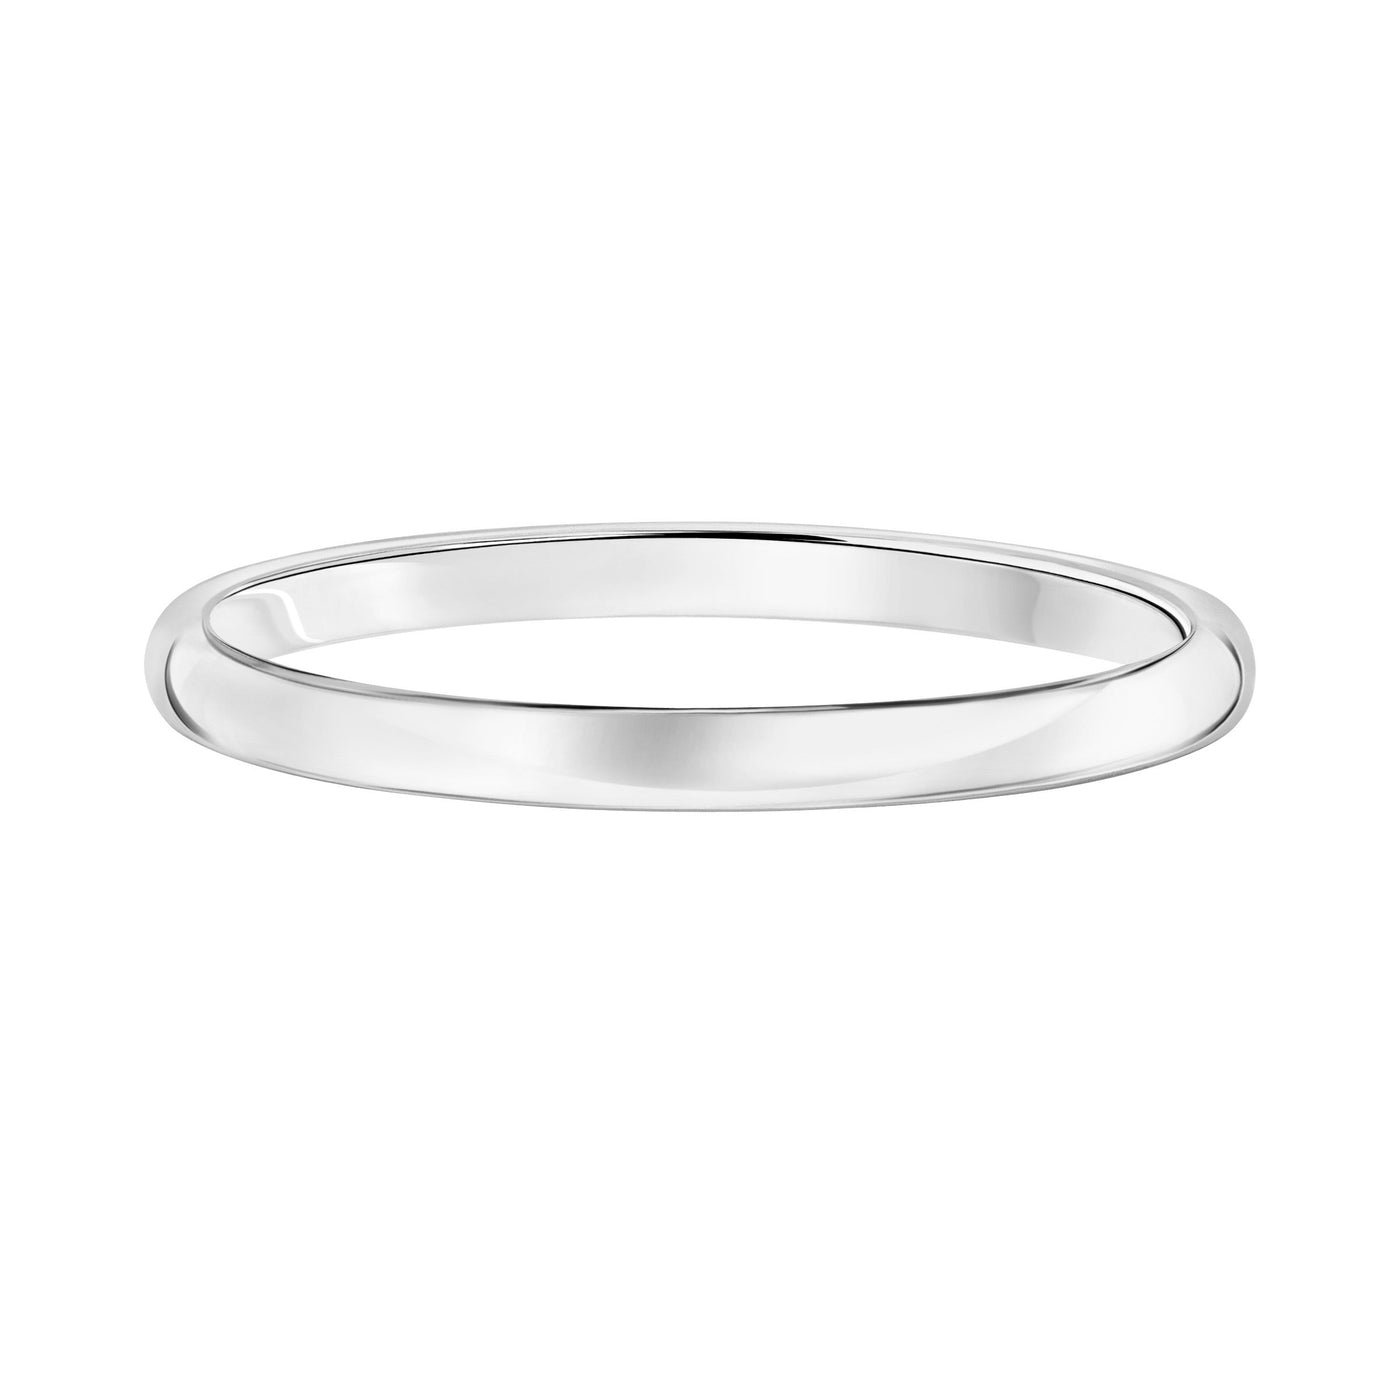 Low Dome Comfort Fit Wedding Band